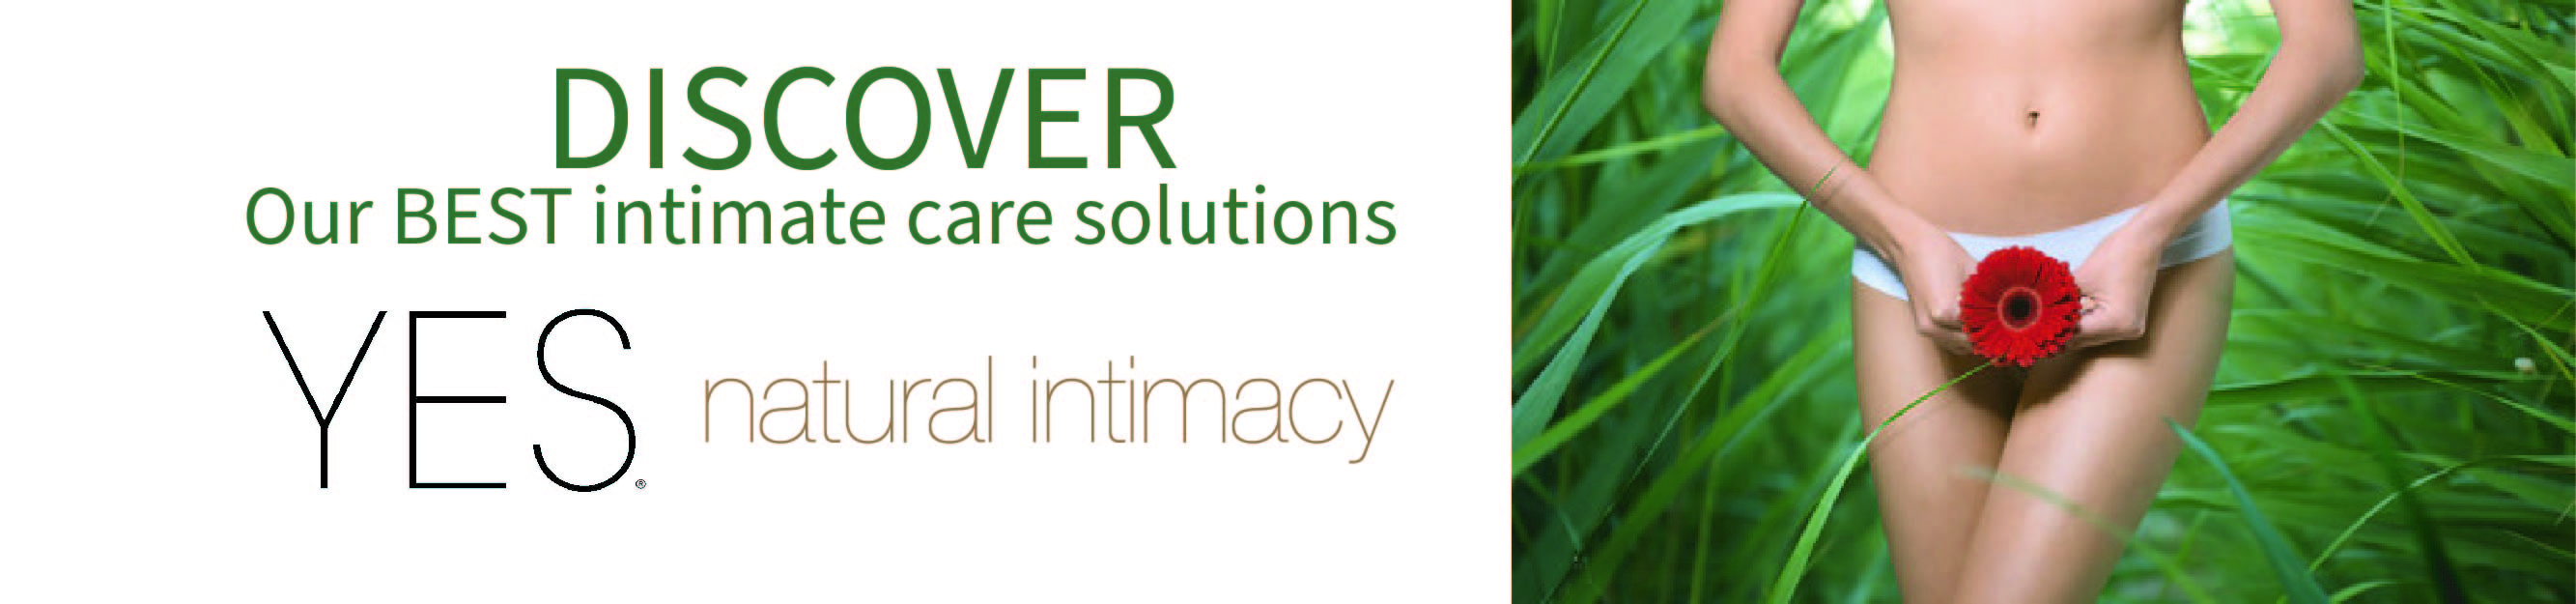 Our Best, Natural, Intimate Care Solutions